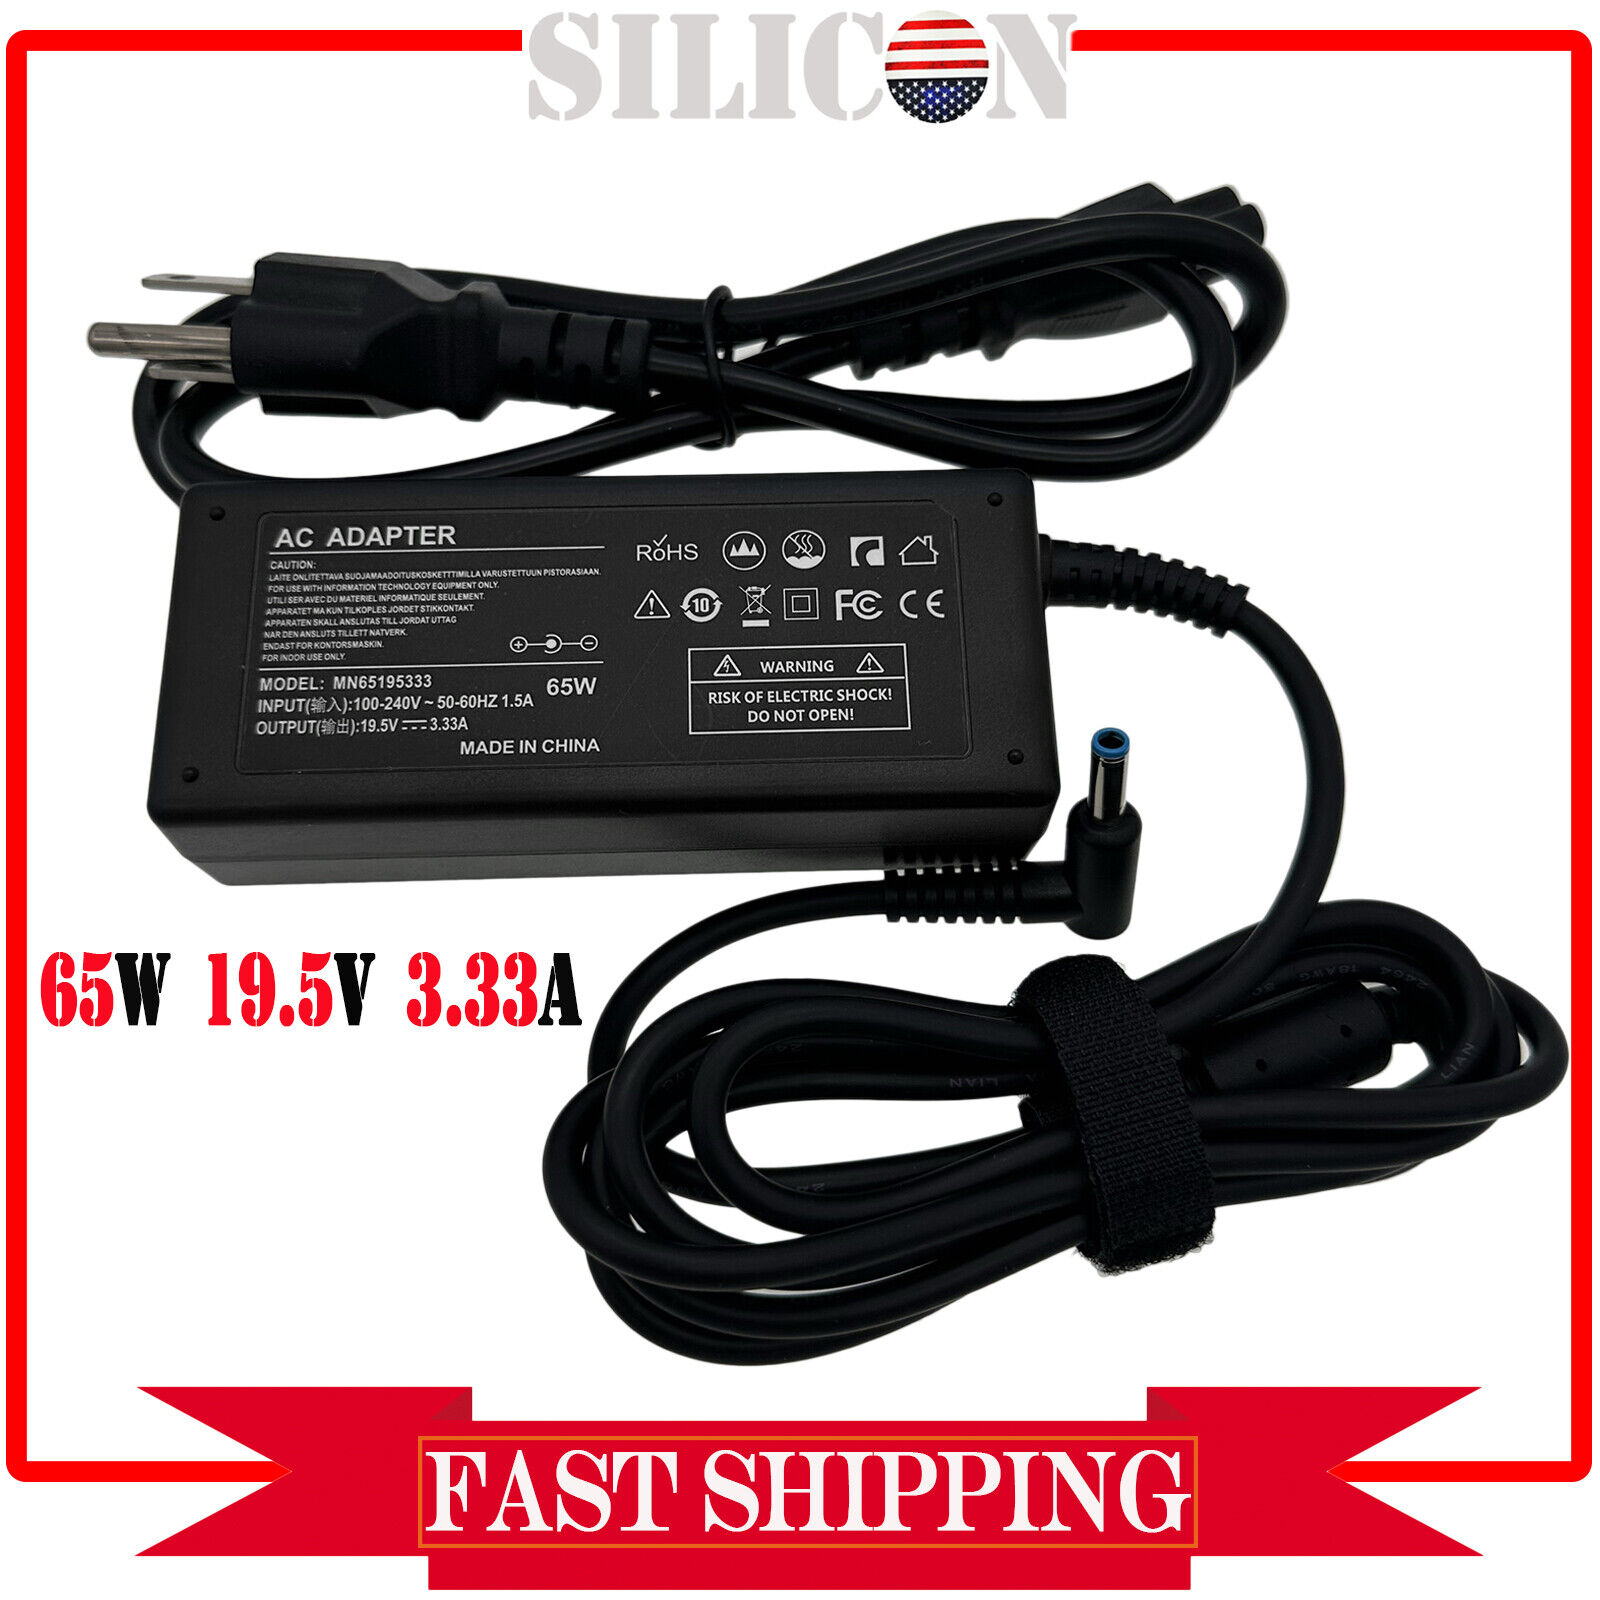 65W AC Charger Adapter For HP 15-ef0021nr 15-ef0023dx 15-ef0025wm 15-ef0875ms